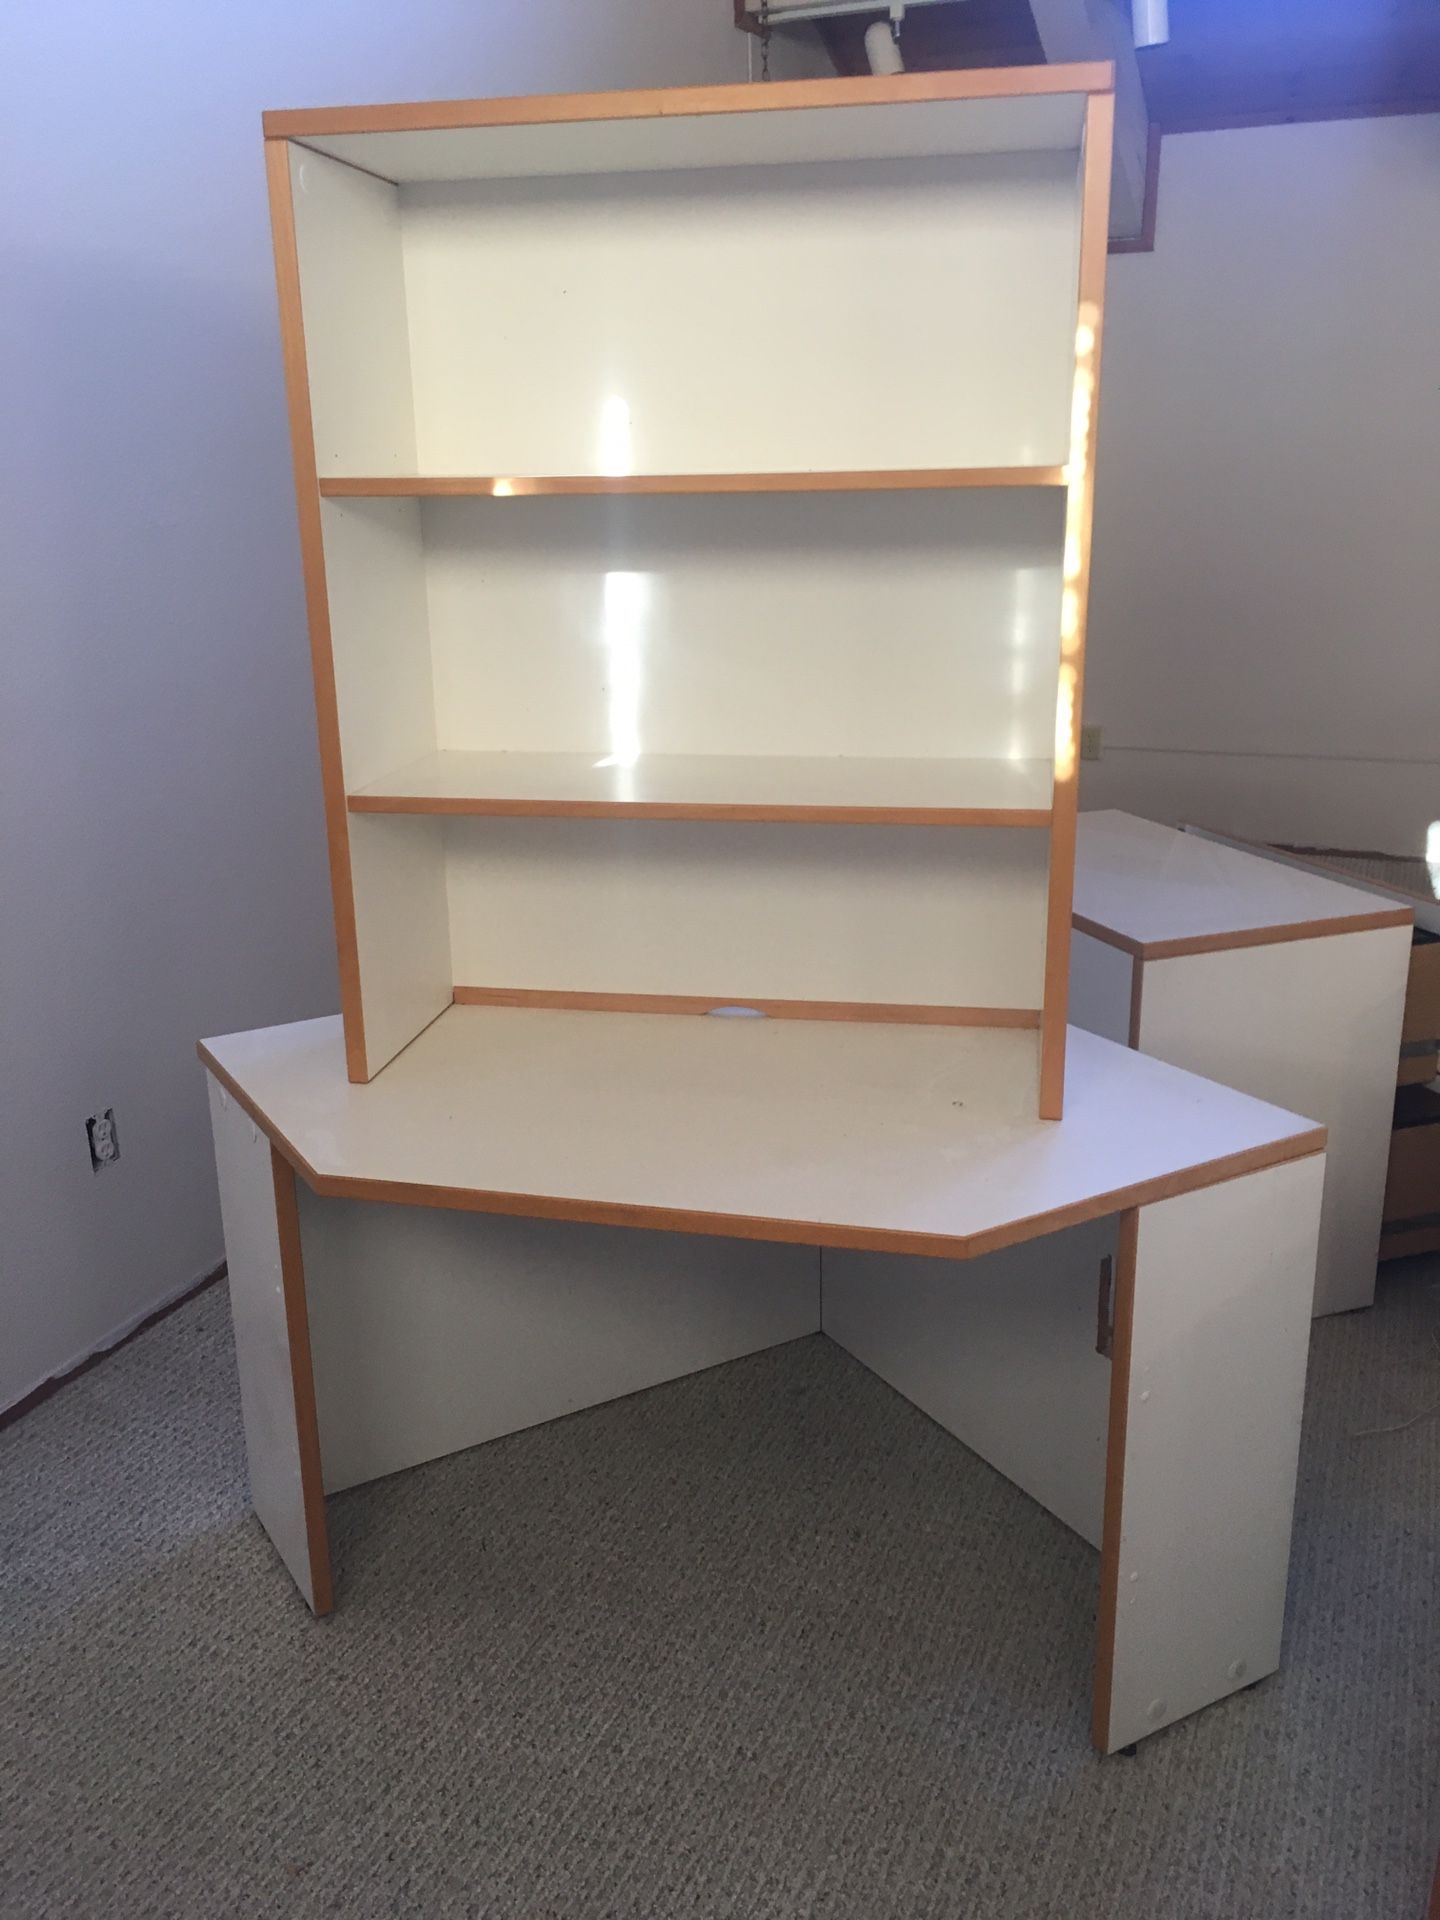 Office furniture excellent shape. White. Located in port orchard